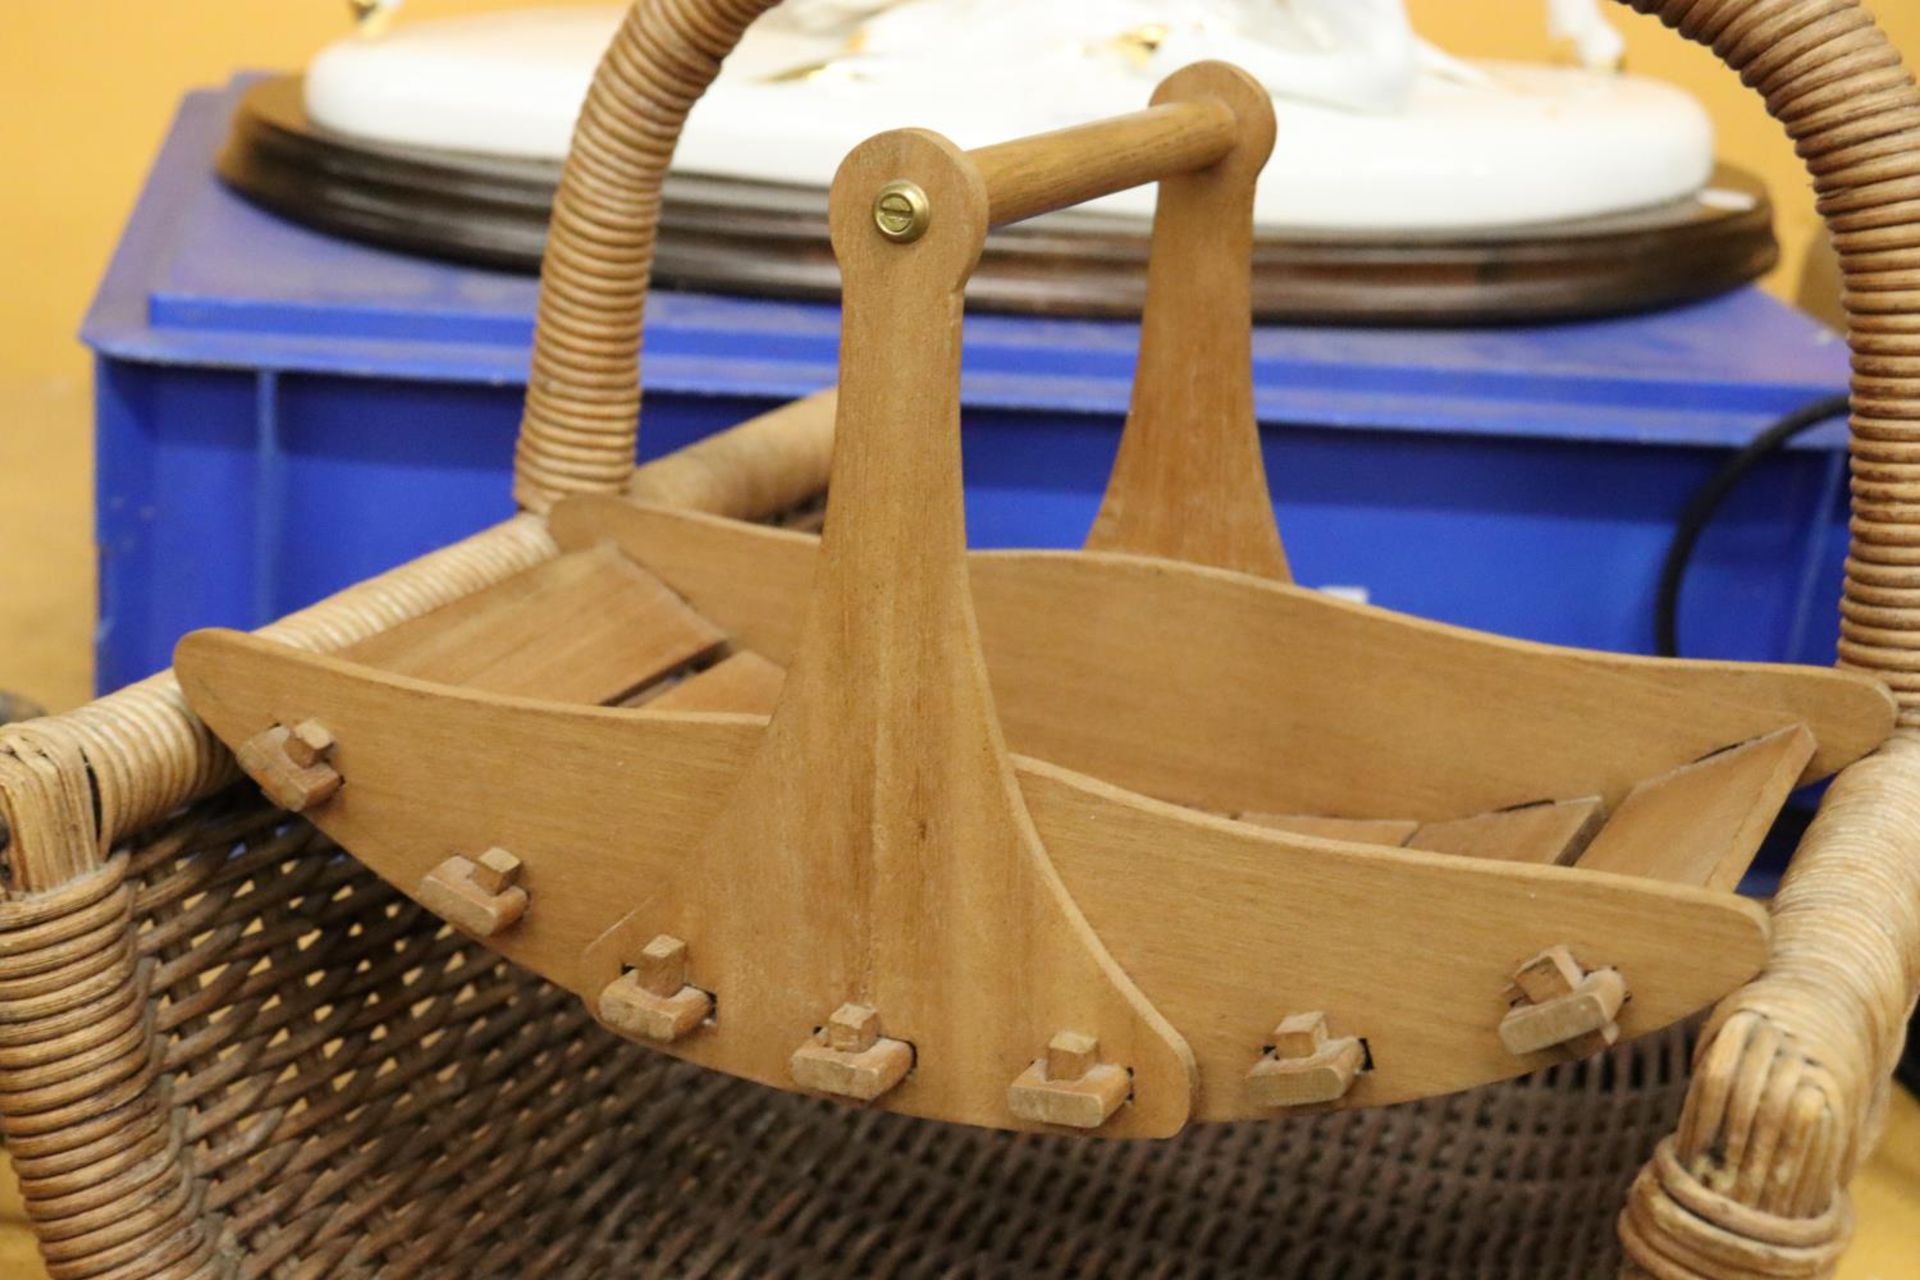 A LARGE BASKET TRUG AND A SMALLER WOODEN ONE - Image 4 of 5